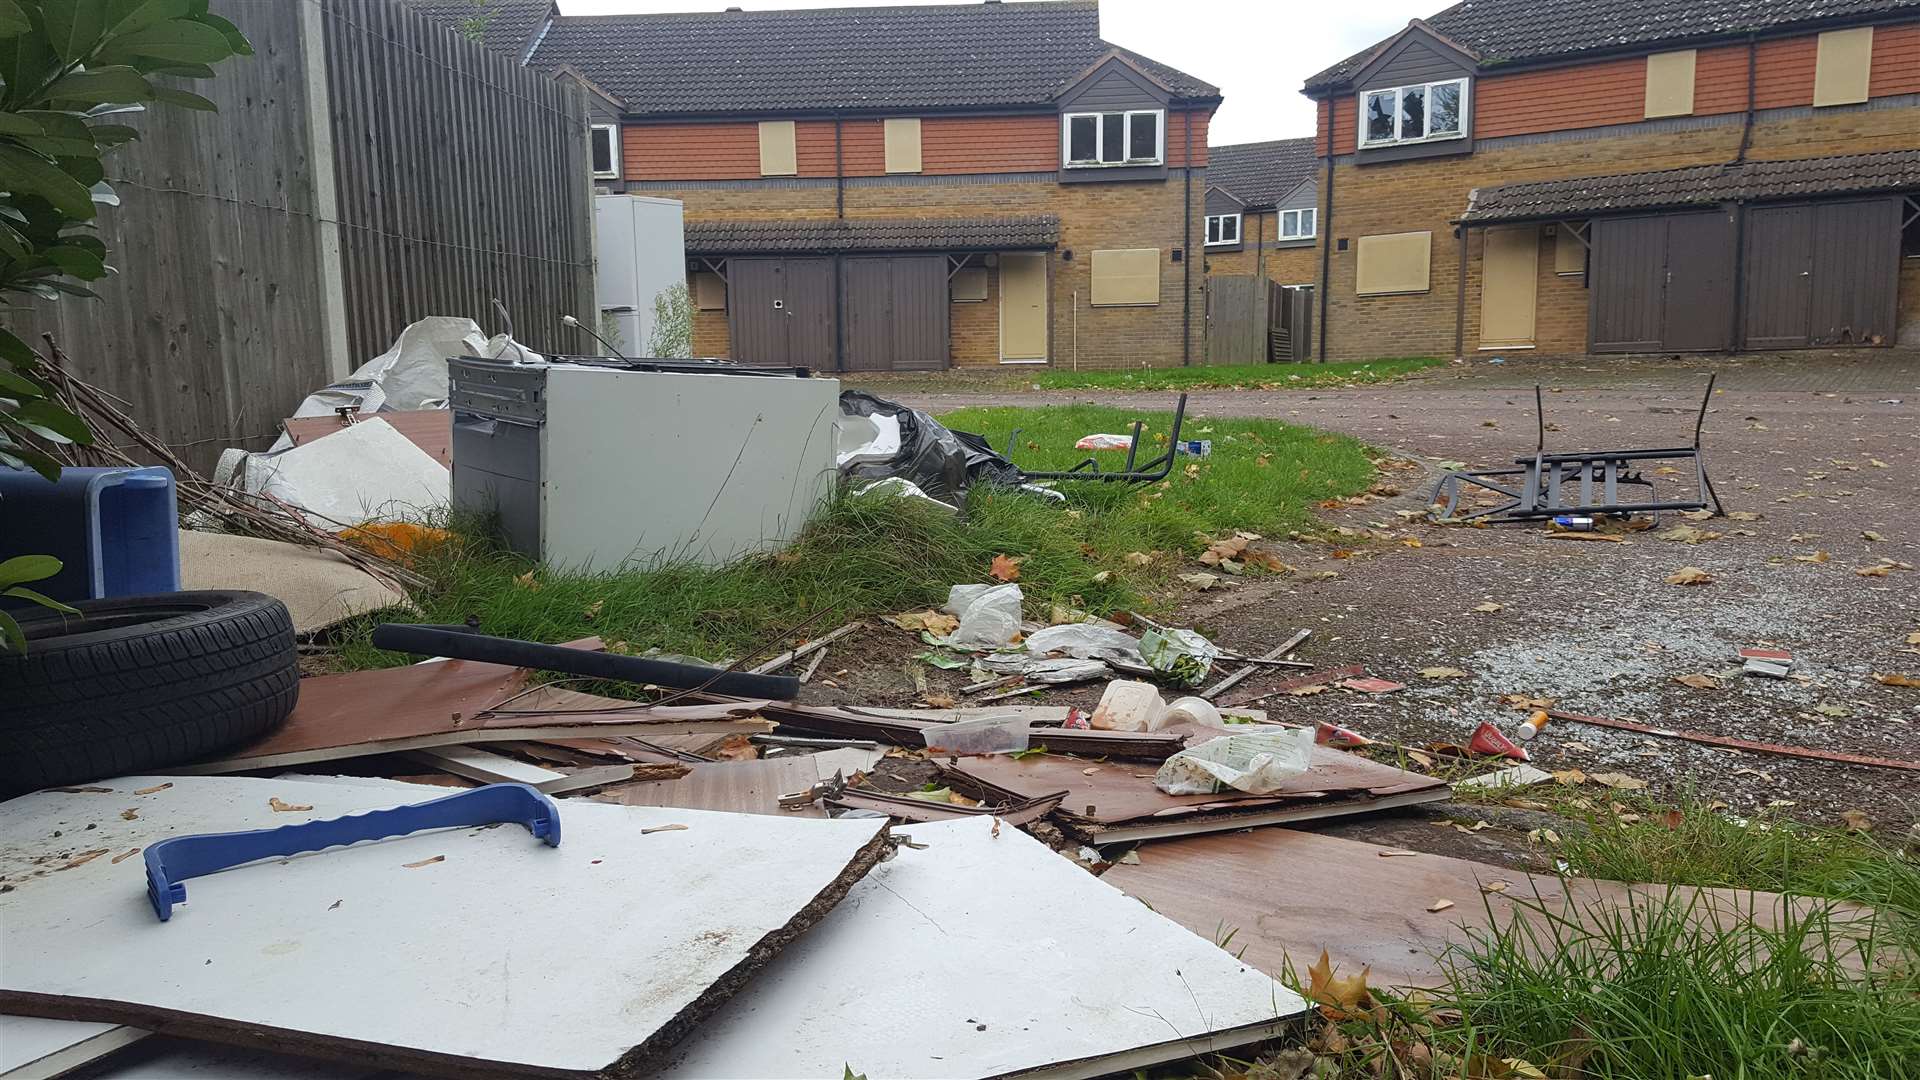 The empty homes and street had become a target for vandals and flytippers (7275358)